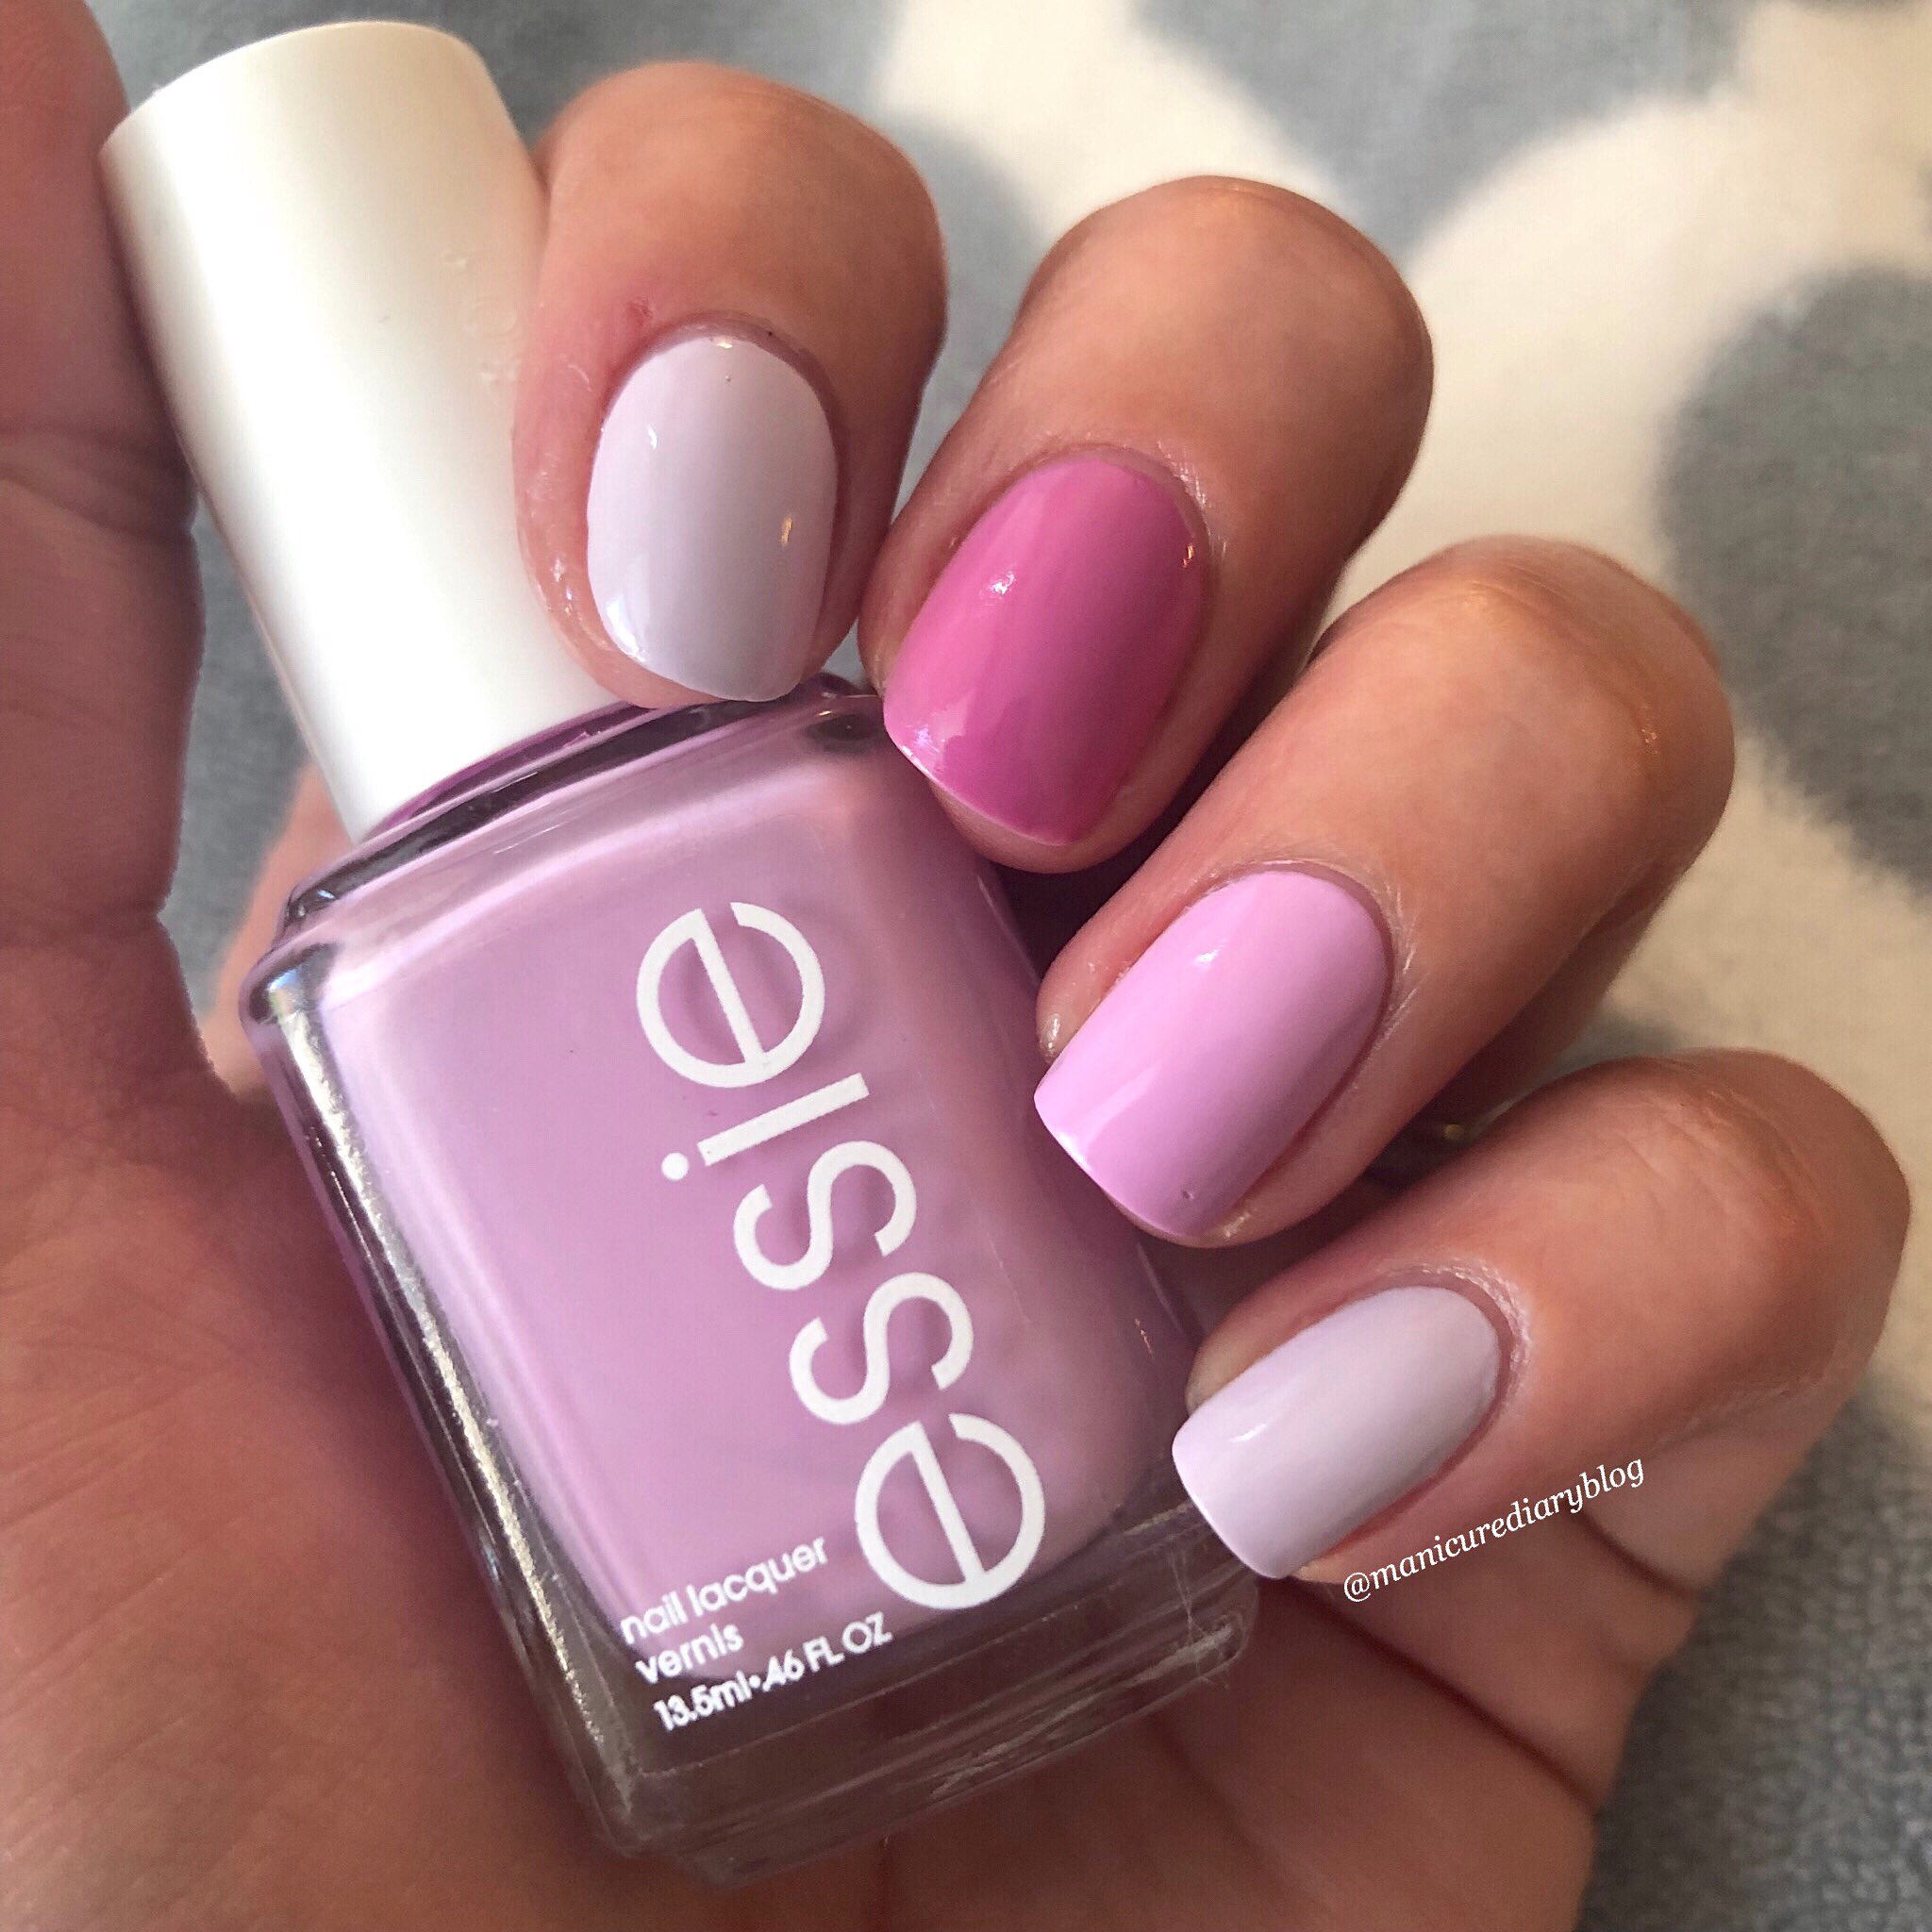 Uzivatel Manicure Diary Na Twitteru Shades Of Pink All Essie Colors Used Go Ginza Splash Of Grenadine And Baguette Me Not Manicurediary Manimonday Essie Essielove Essiegoginza Essiesplashofgrenadine Essiebaguettemenot Pinknails